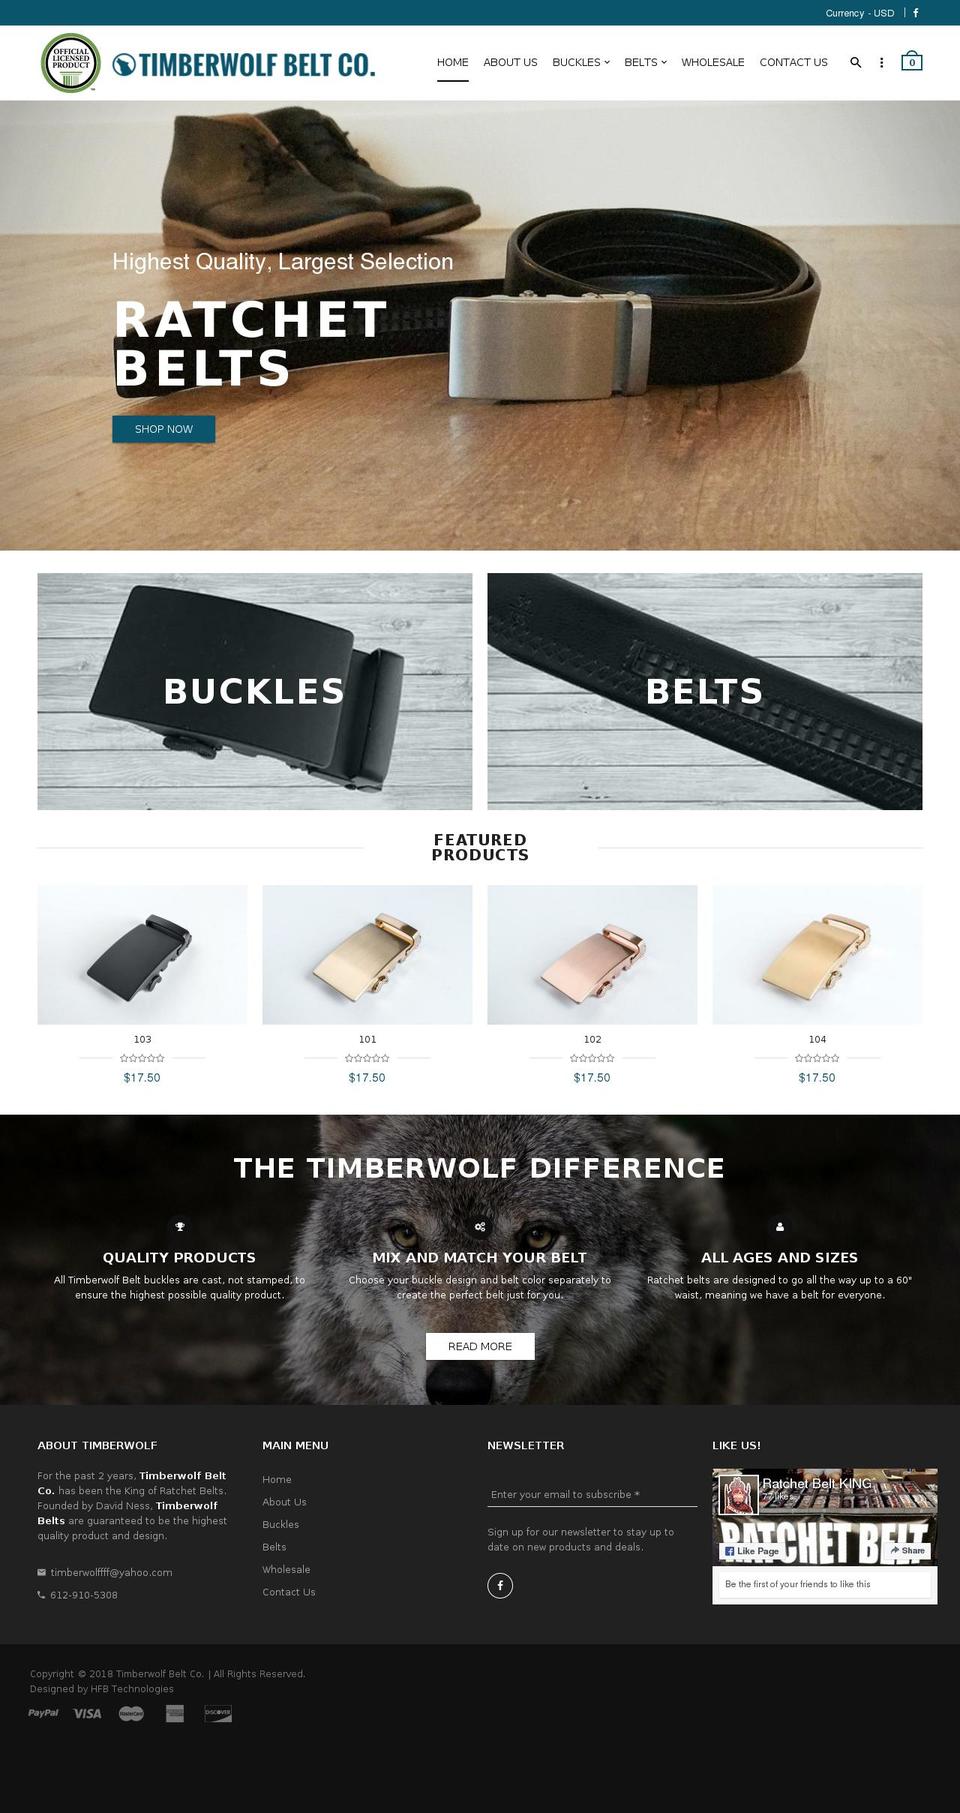 Timber Shopify theme site example timberwolfbelts.com